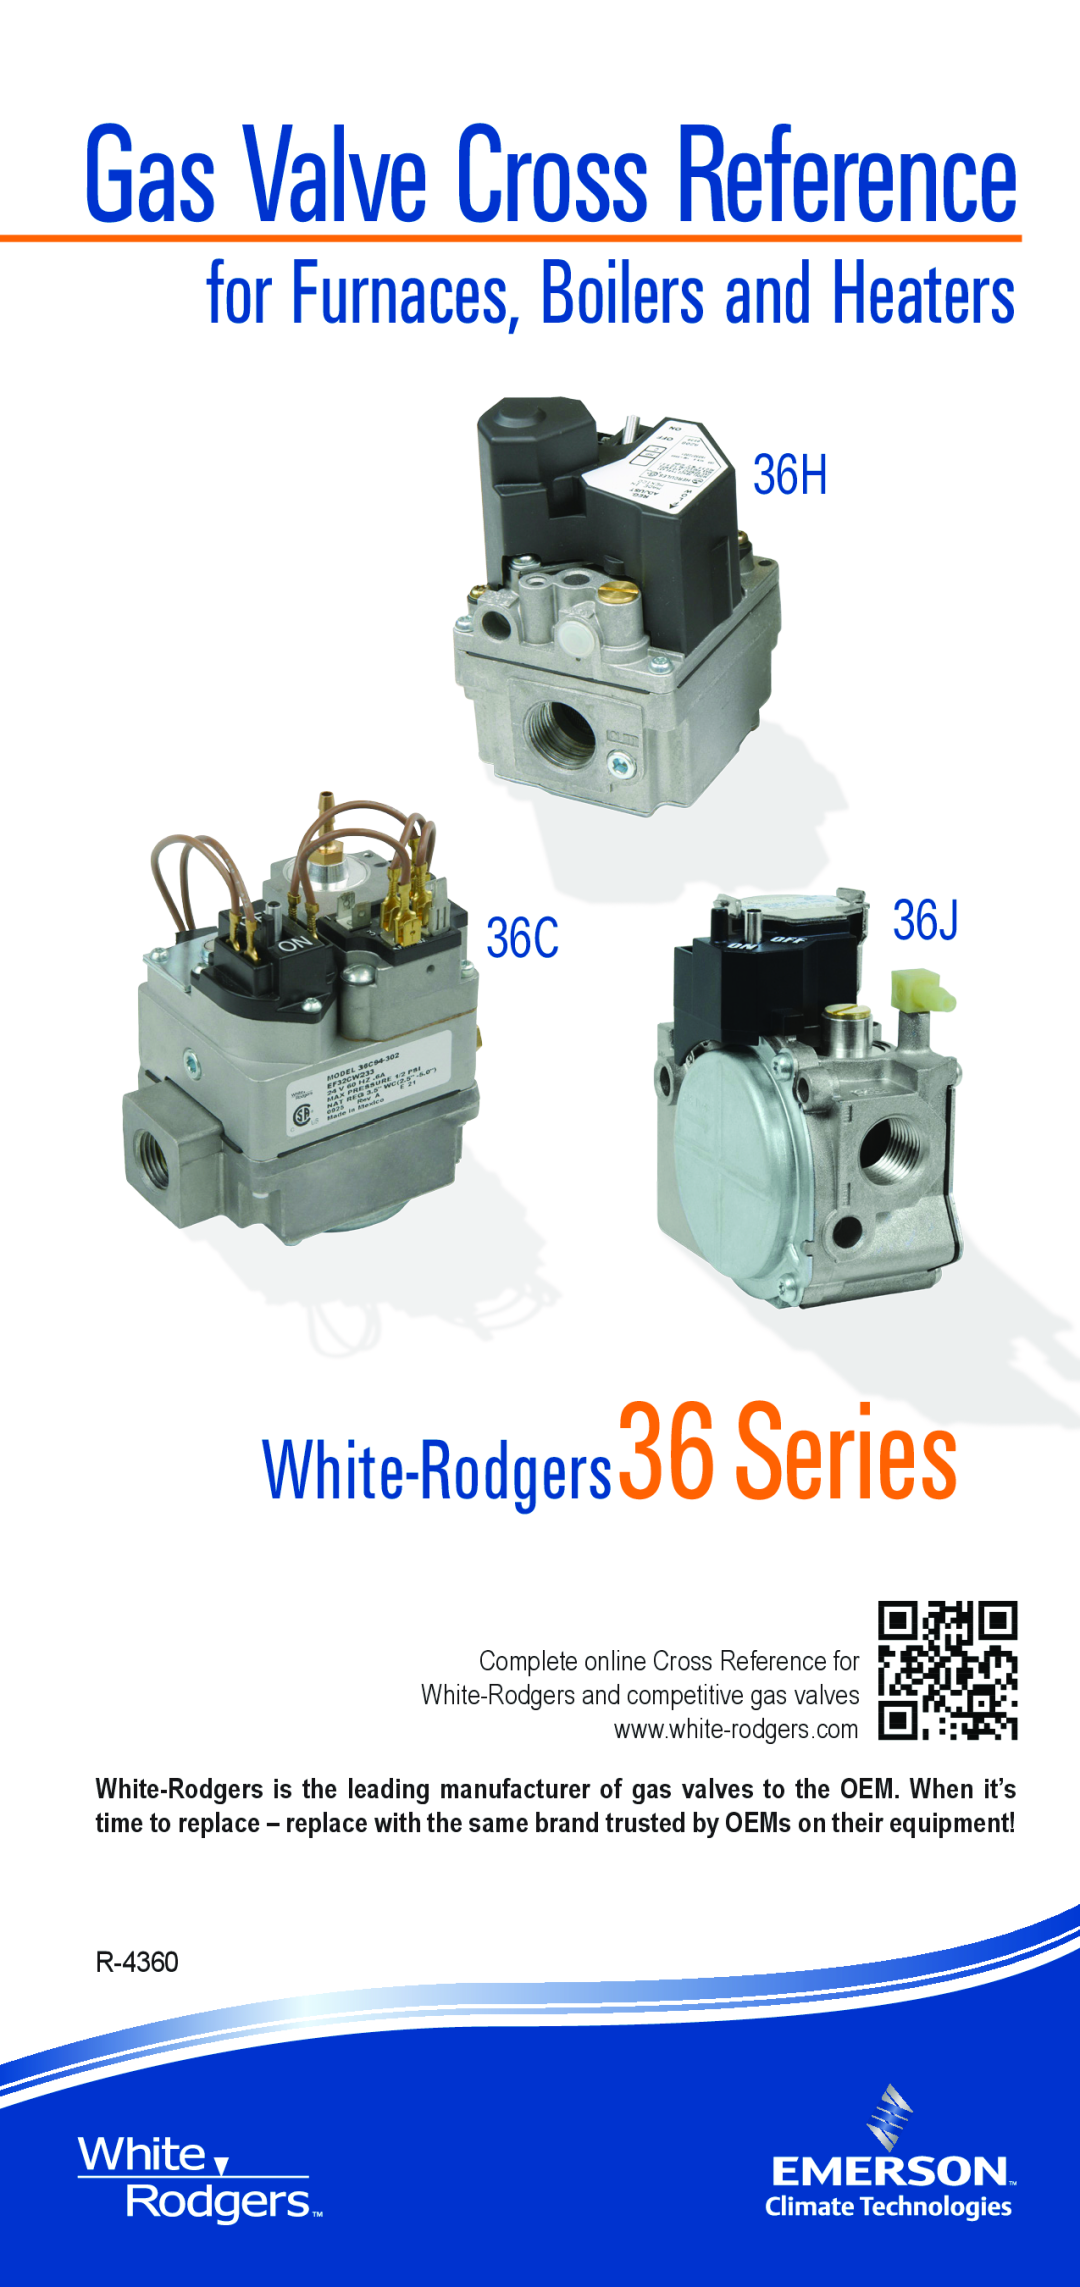 Emerson manual Gas Valve Cross Reference, 36H 36C 36J, for Furnaces, Boilers and Heaters, White-Rodgers36Series 